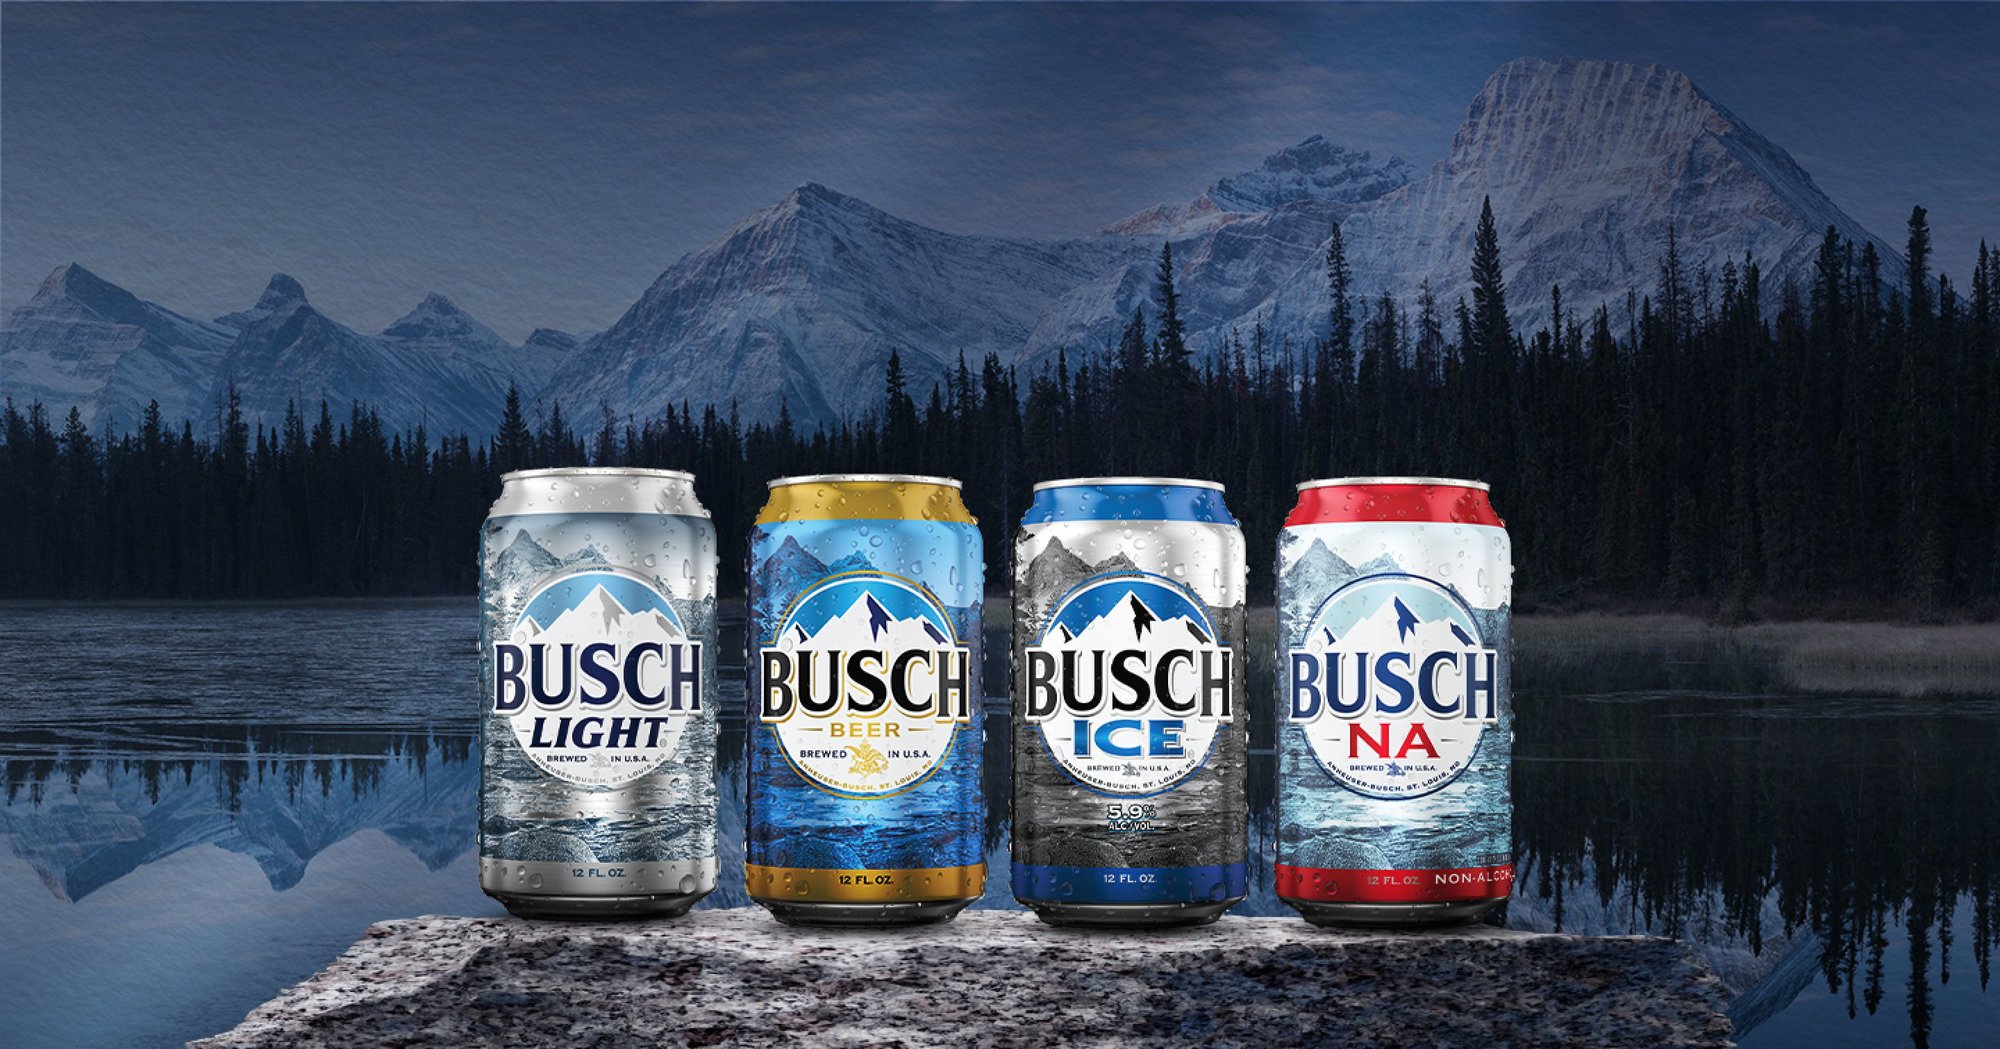 Ice cold Busch Light, Busch, Busch Ice, and Busch NA beer cans in front of mountains and trees.